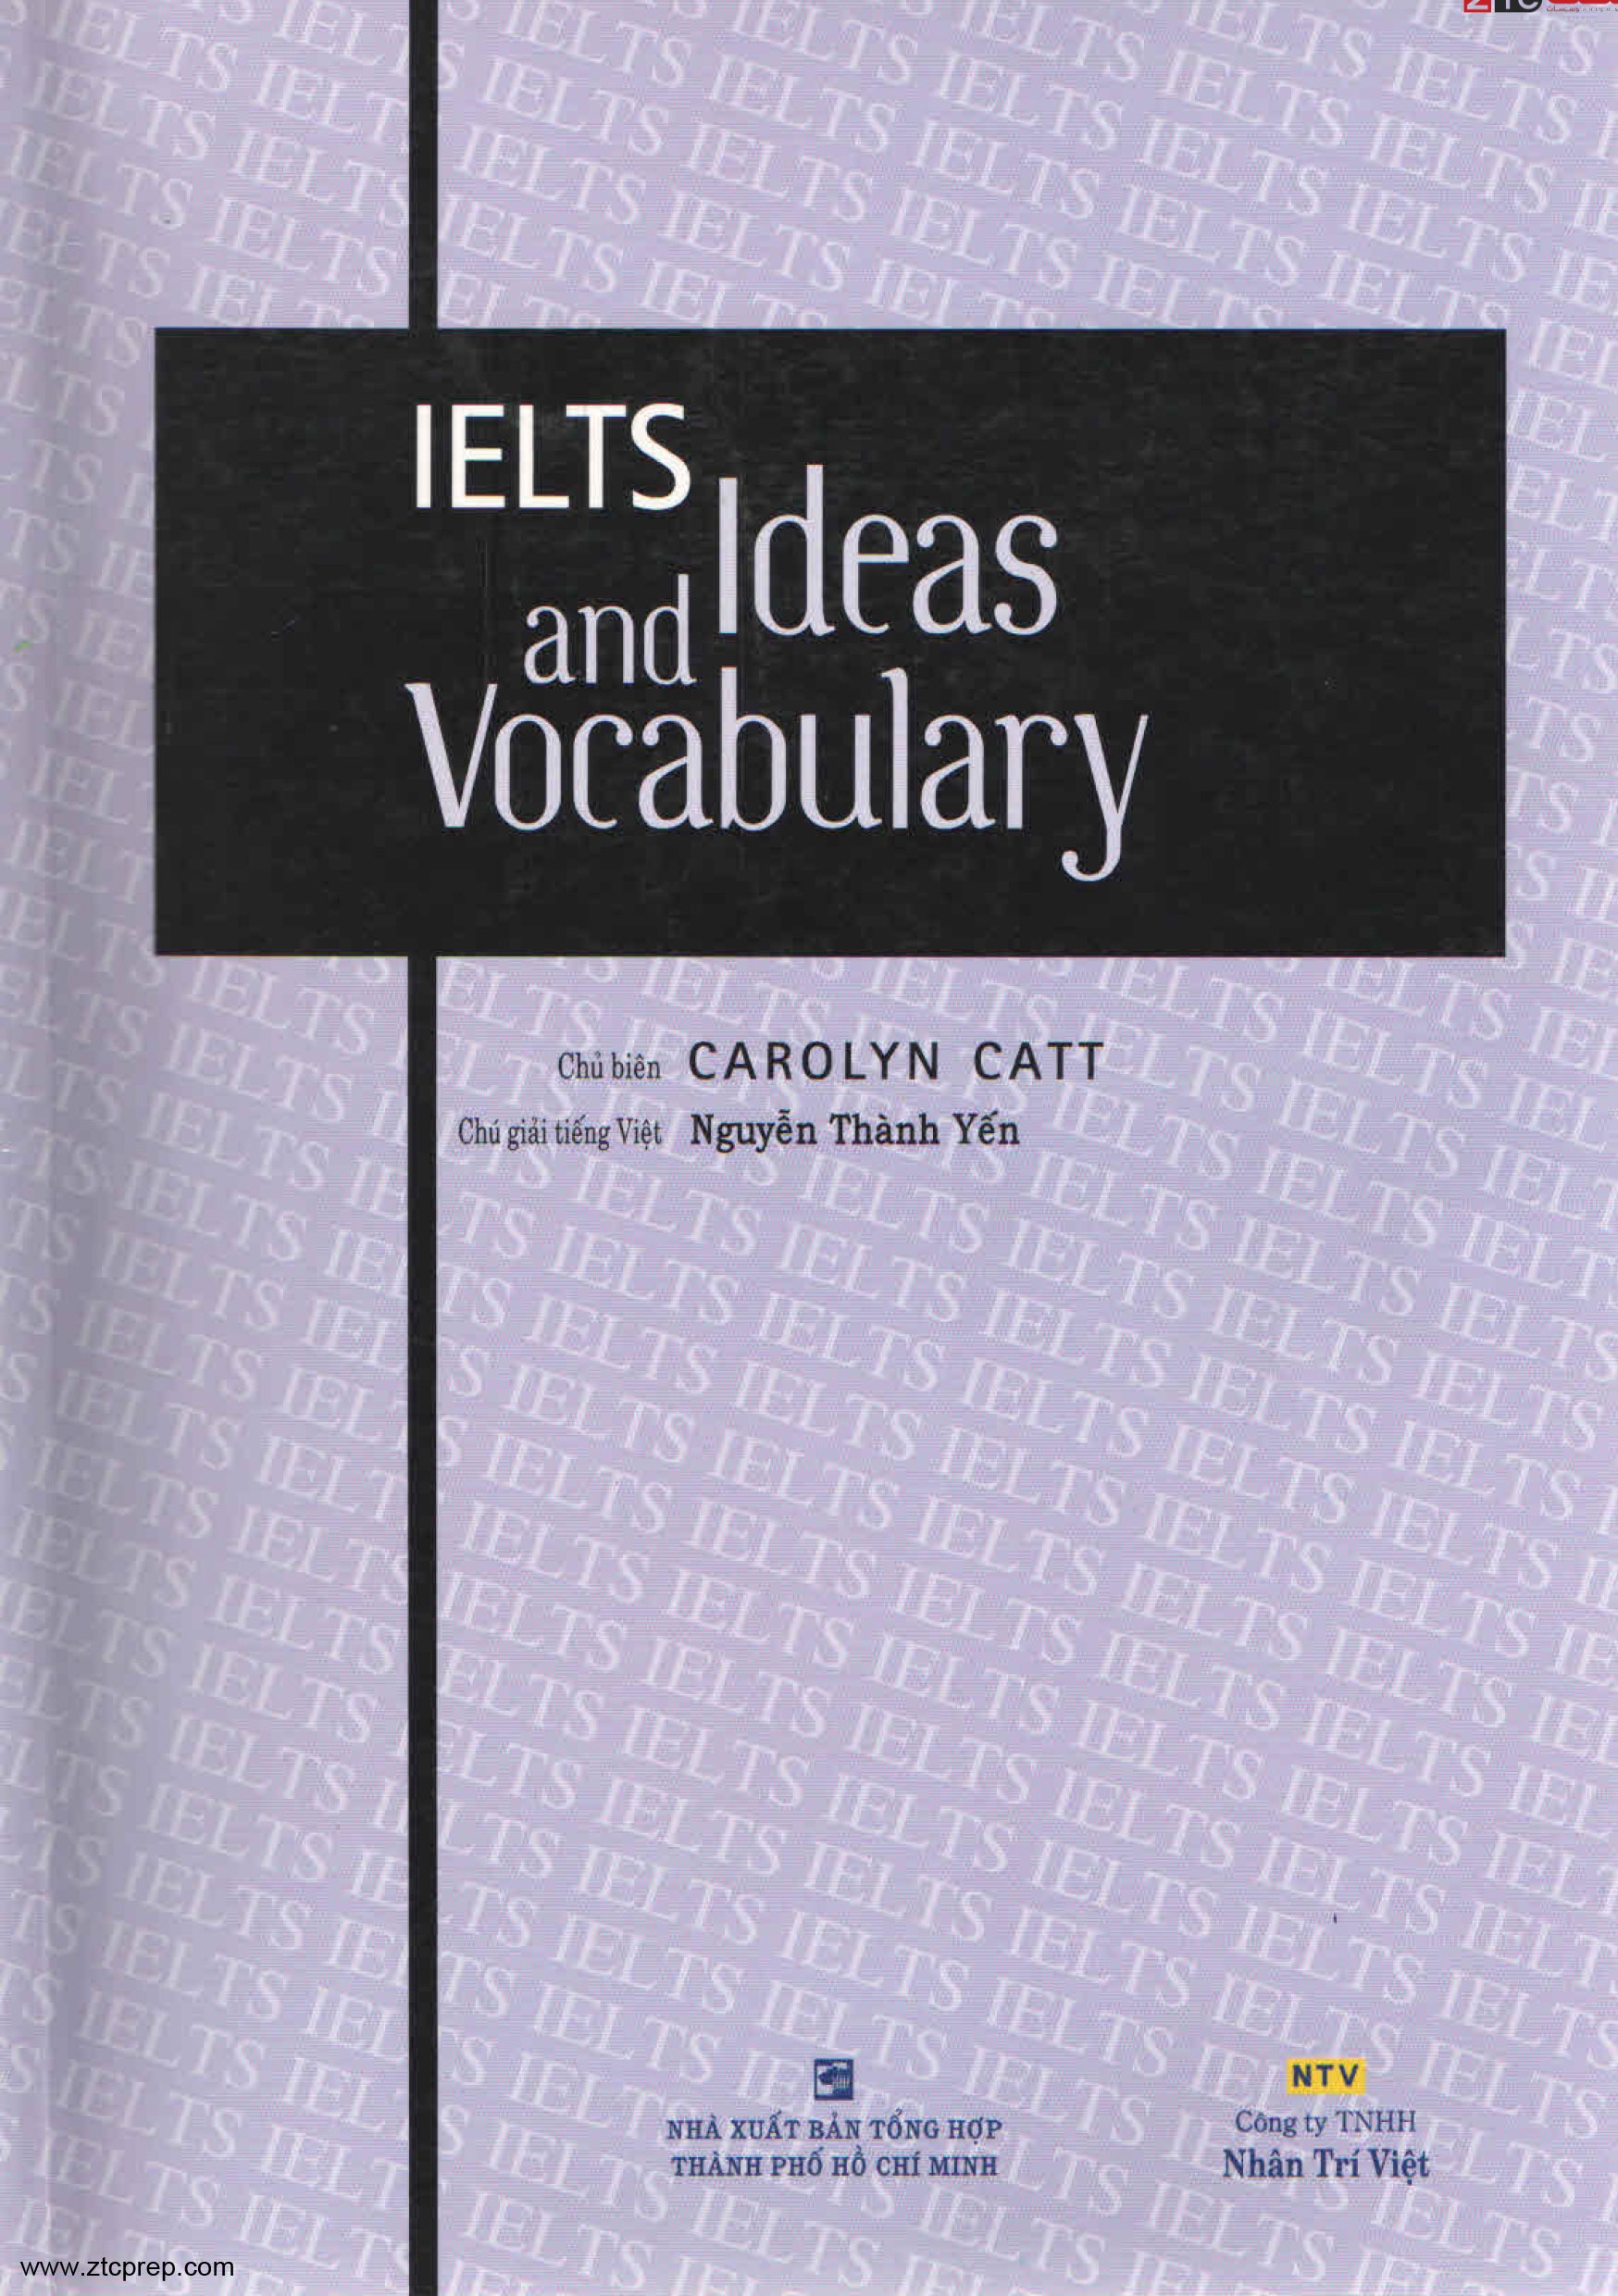 IELTS Ideas and vocabulary